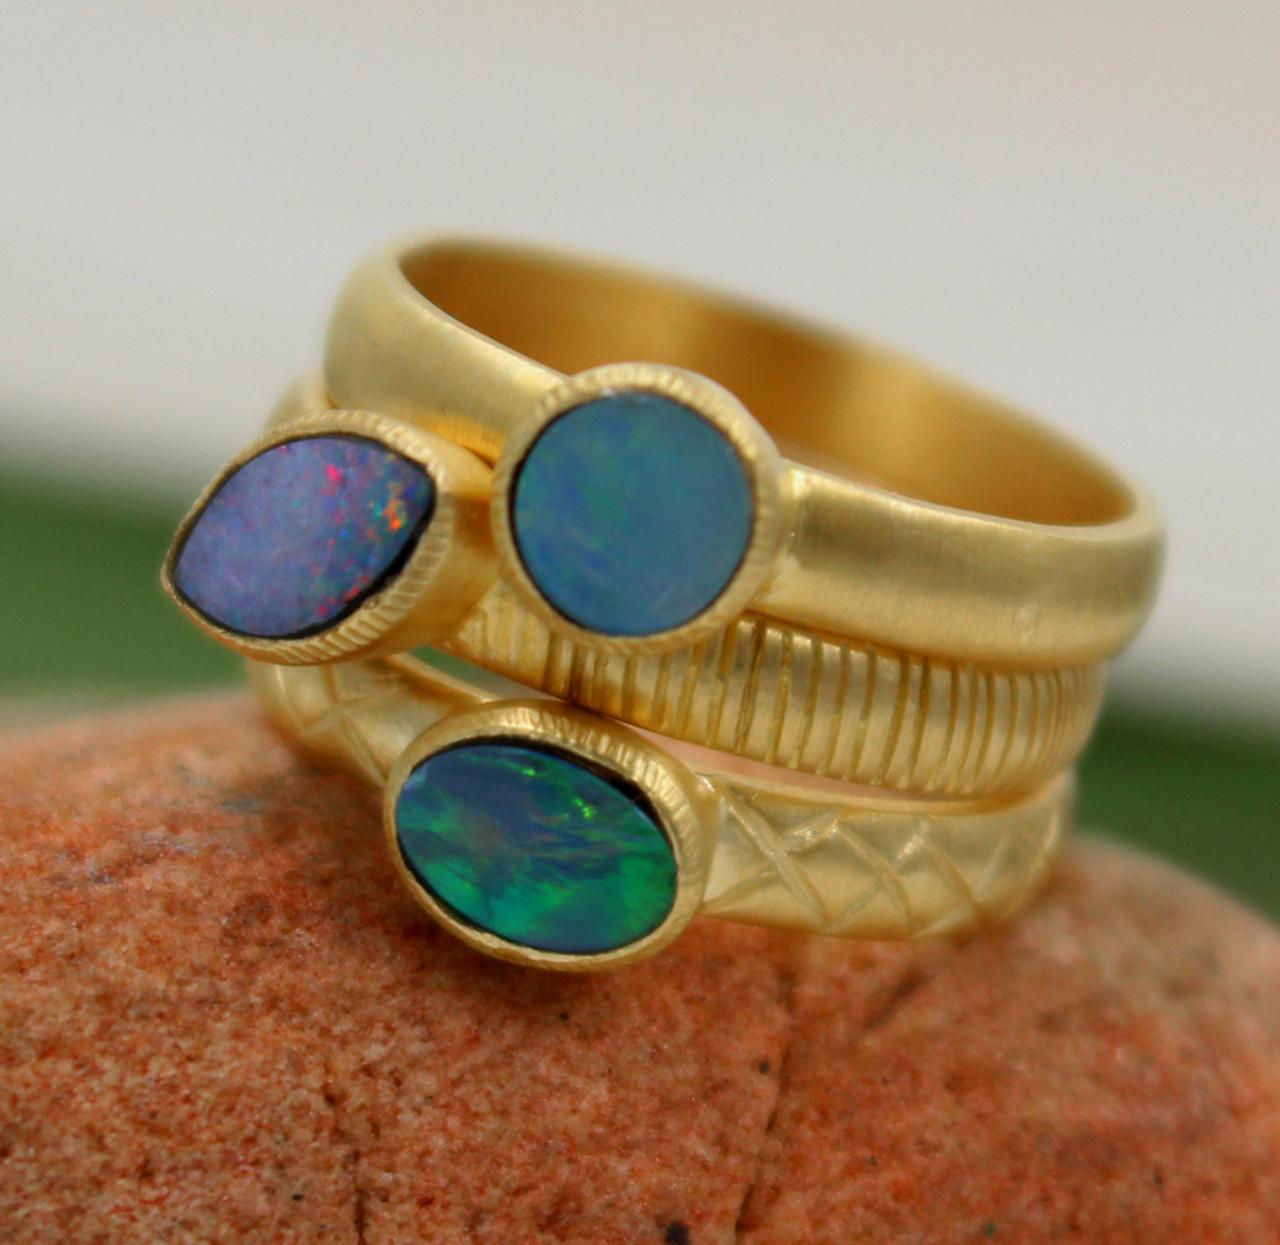 Gorgeous Australian Opal Doublet Ring Set,3 Stacking Rings,solid 925 Sterling Silver Jewelry,valentine Gift,anniversary Ring,